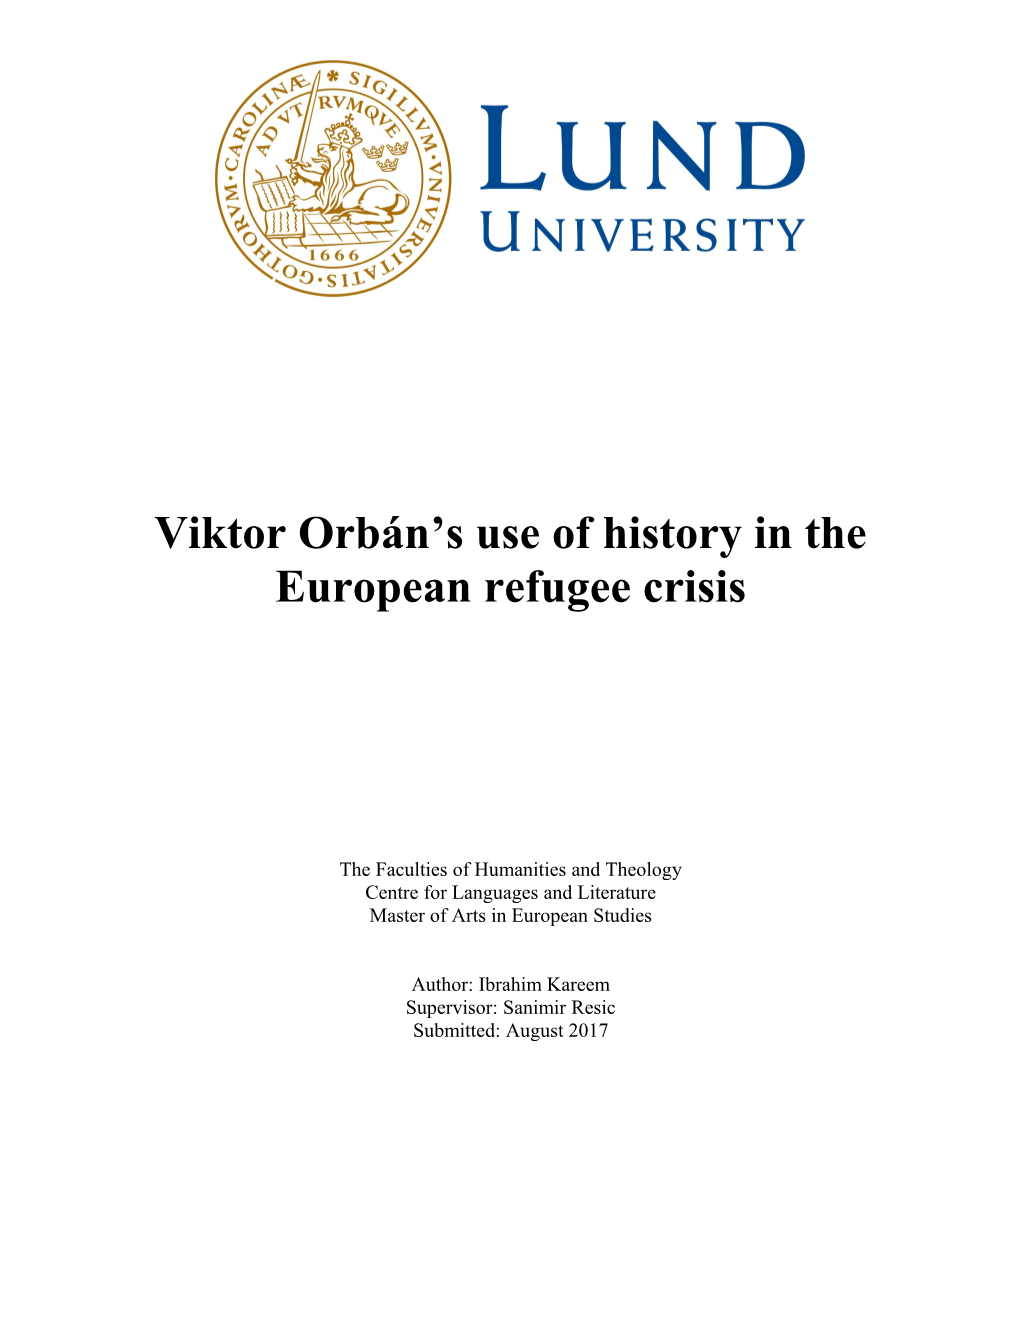 Viktor Orbán S Use of History in the European Refugee Crisis